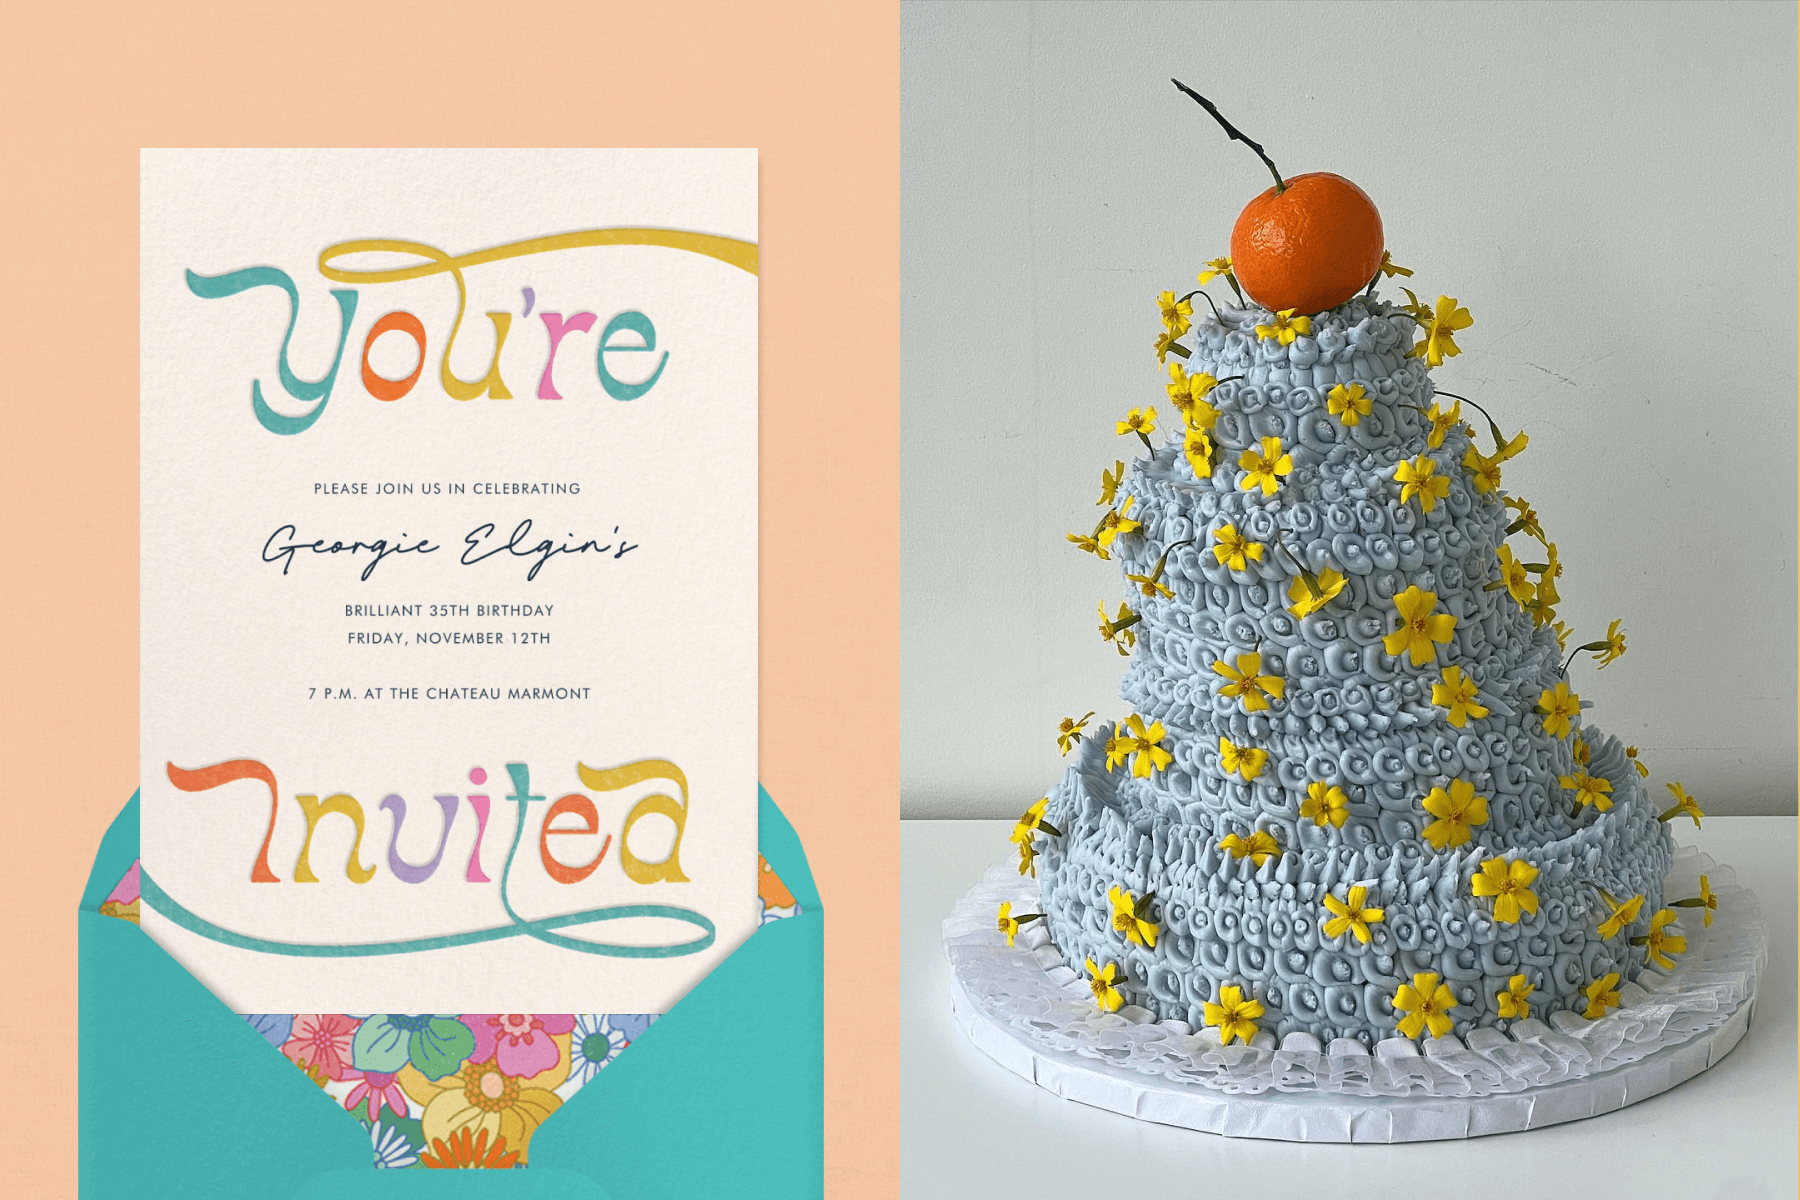 Left: A birthday invitation with the words “You’re Invited”in rainbow script on top and bottom and an aqua envelope with pop art floral liner. Right: An imperfect, blue-frosted tiered cake with small yellow flowers poking out all over and a clementine on top.